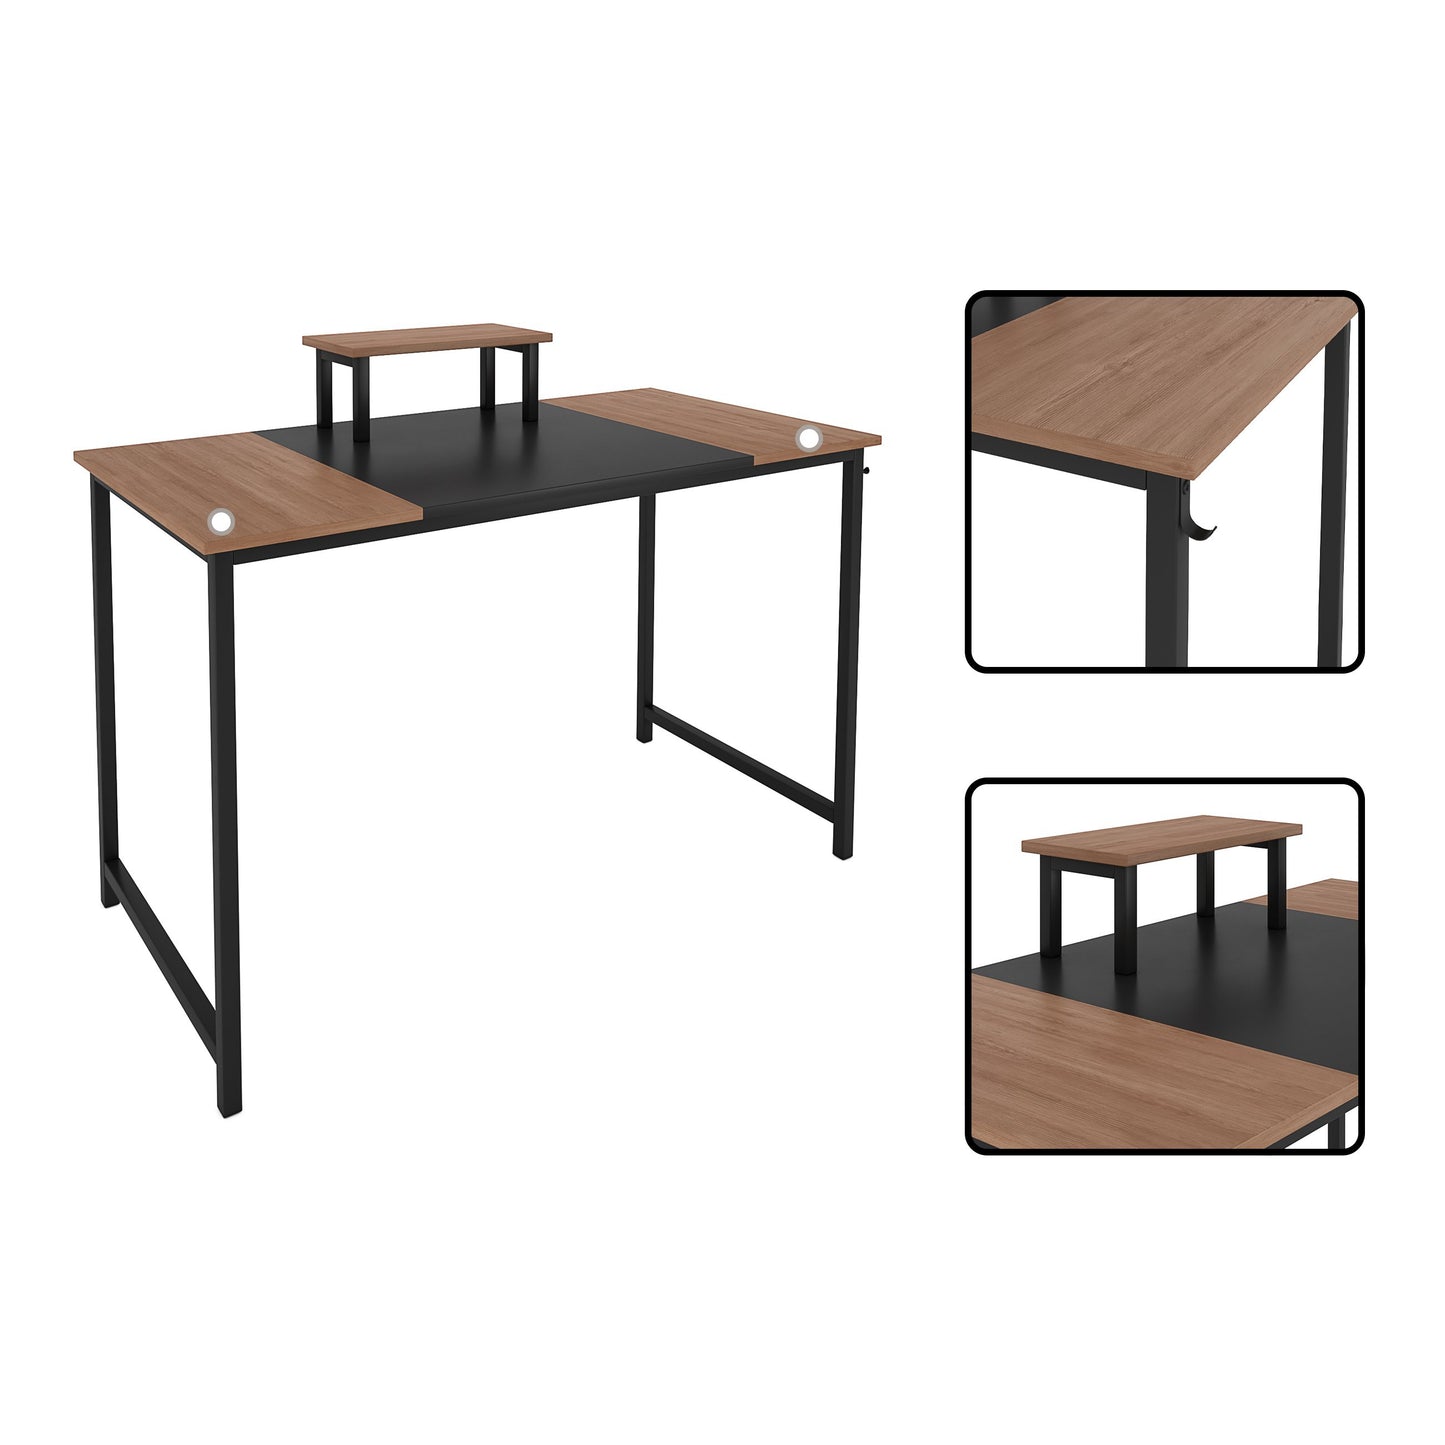 Nancy's Georgetown Desk - Computer table - Office table - Monitor stand - Mouse pad - Brown - Black - Engineered Wood - Steel - 120 x 60 x 75 cm